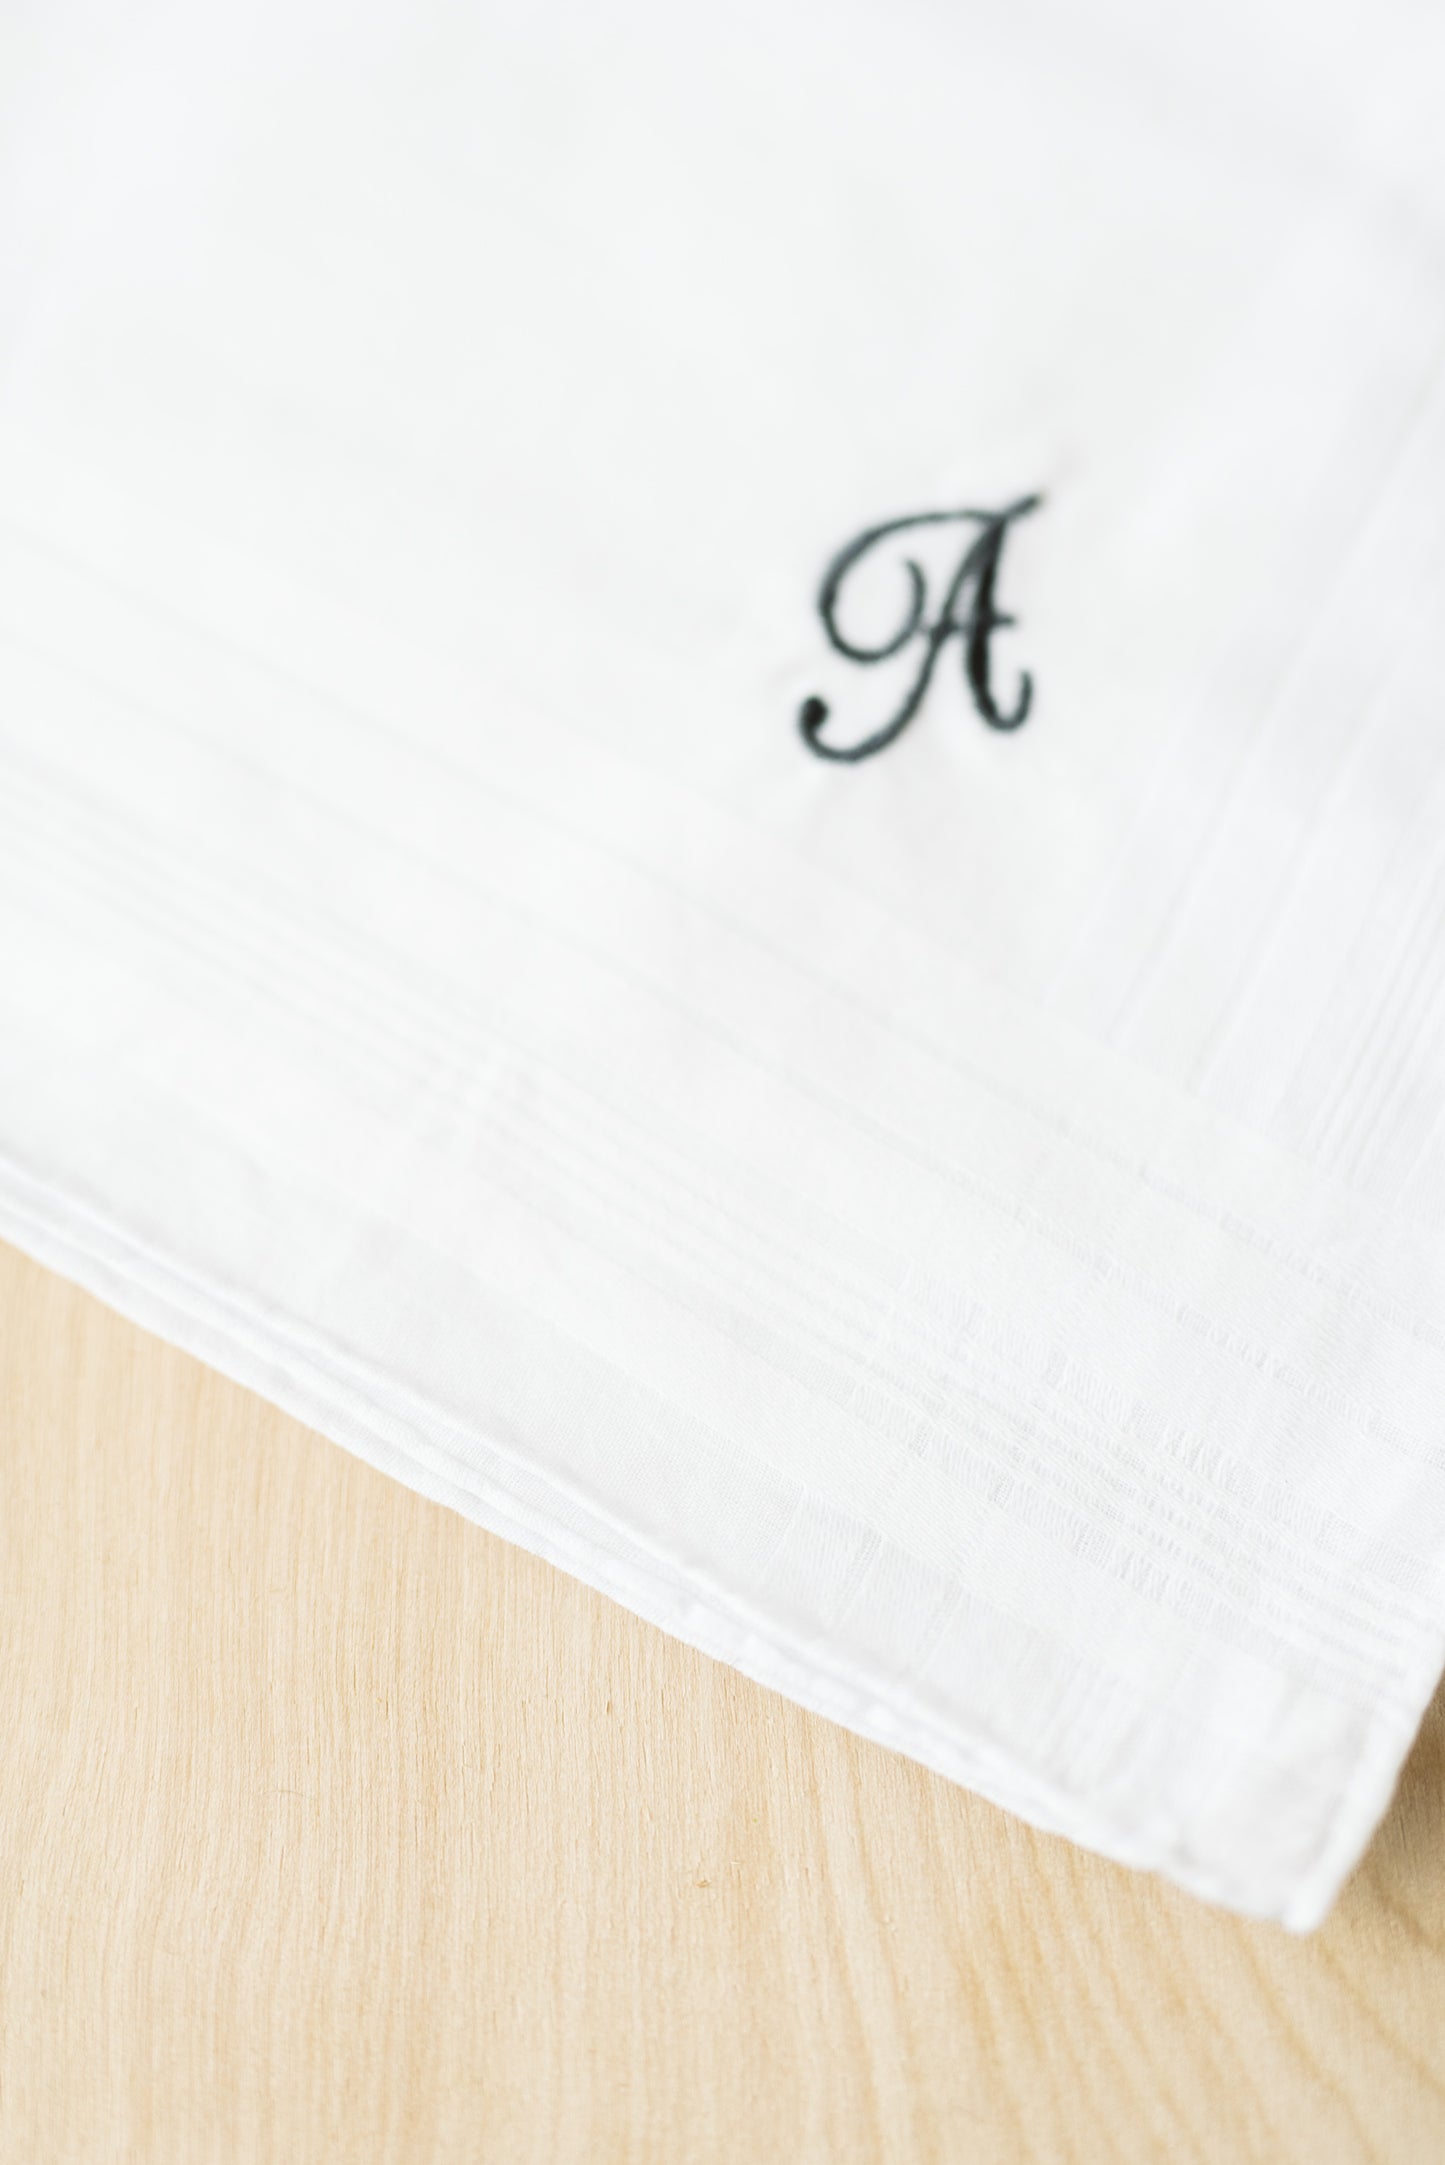 Men's Single Initial Embroidered Handkerchief